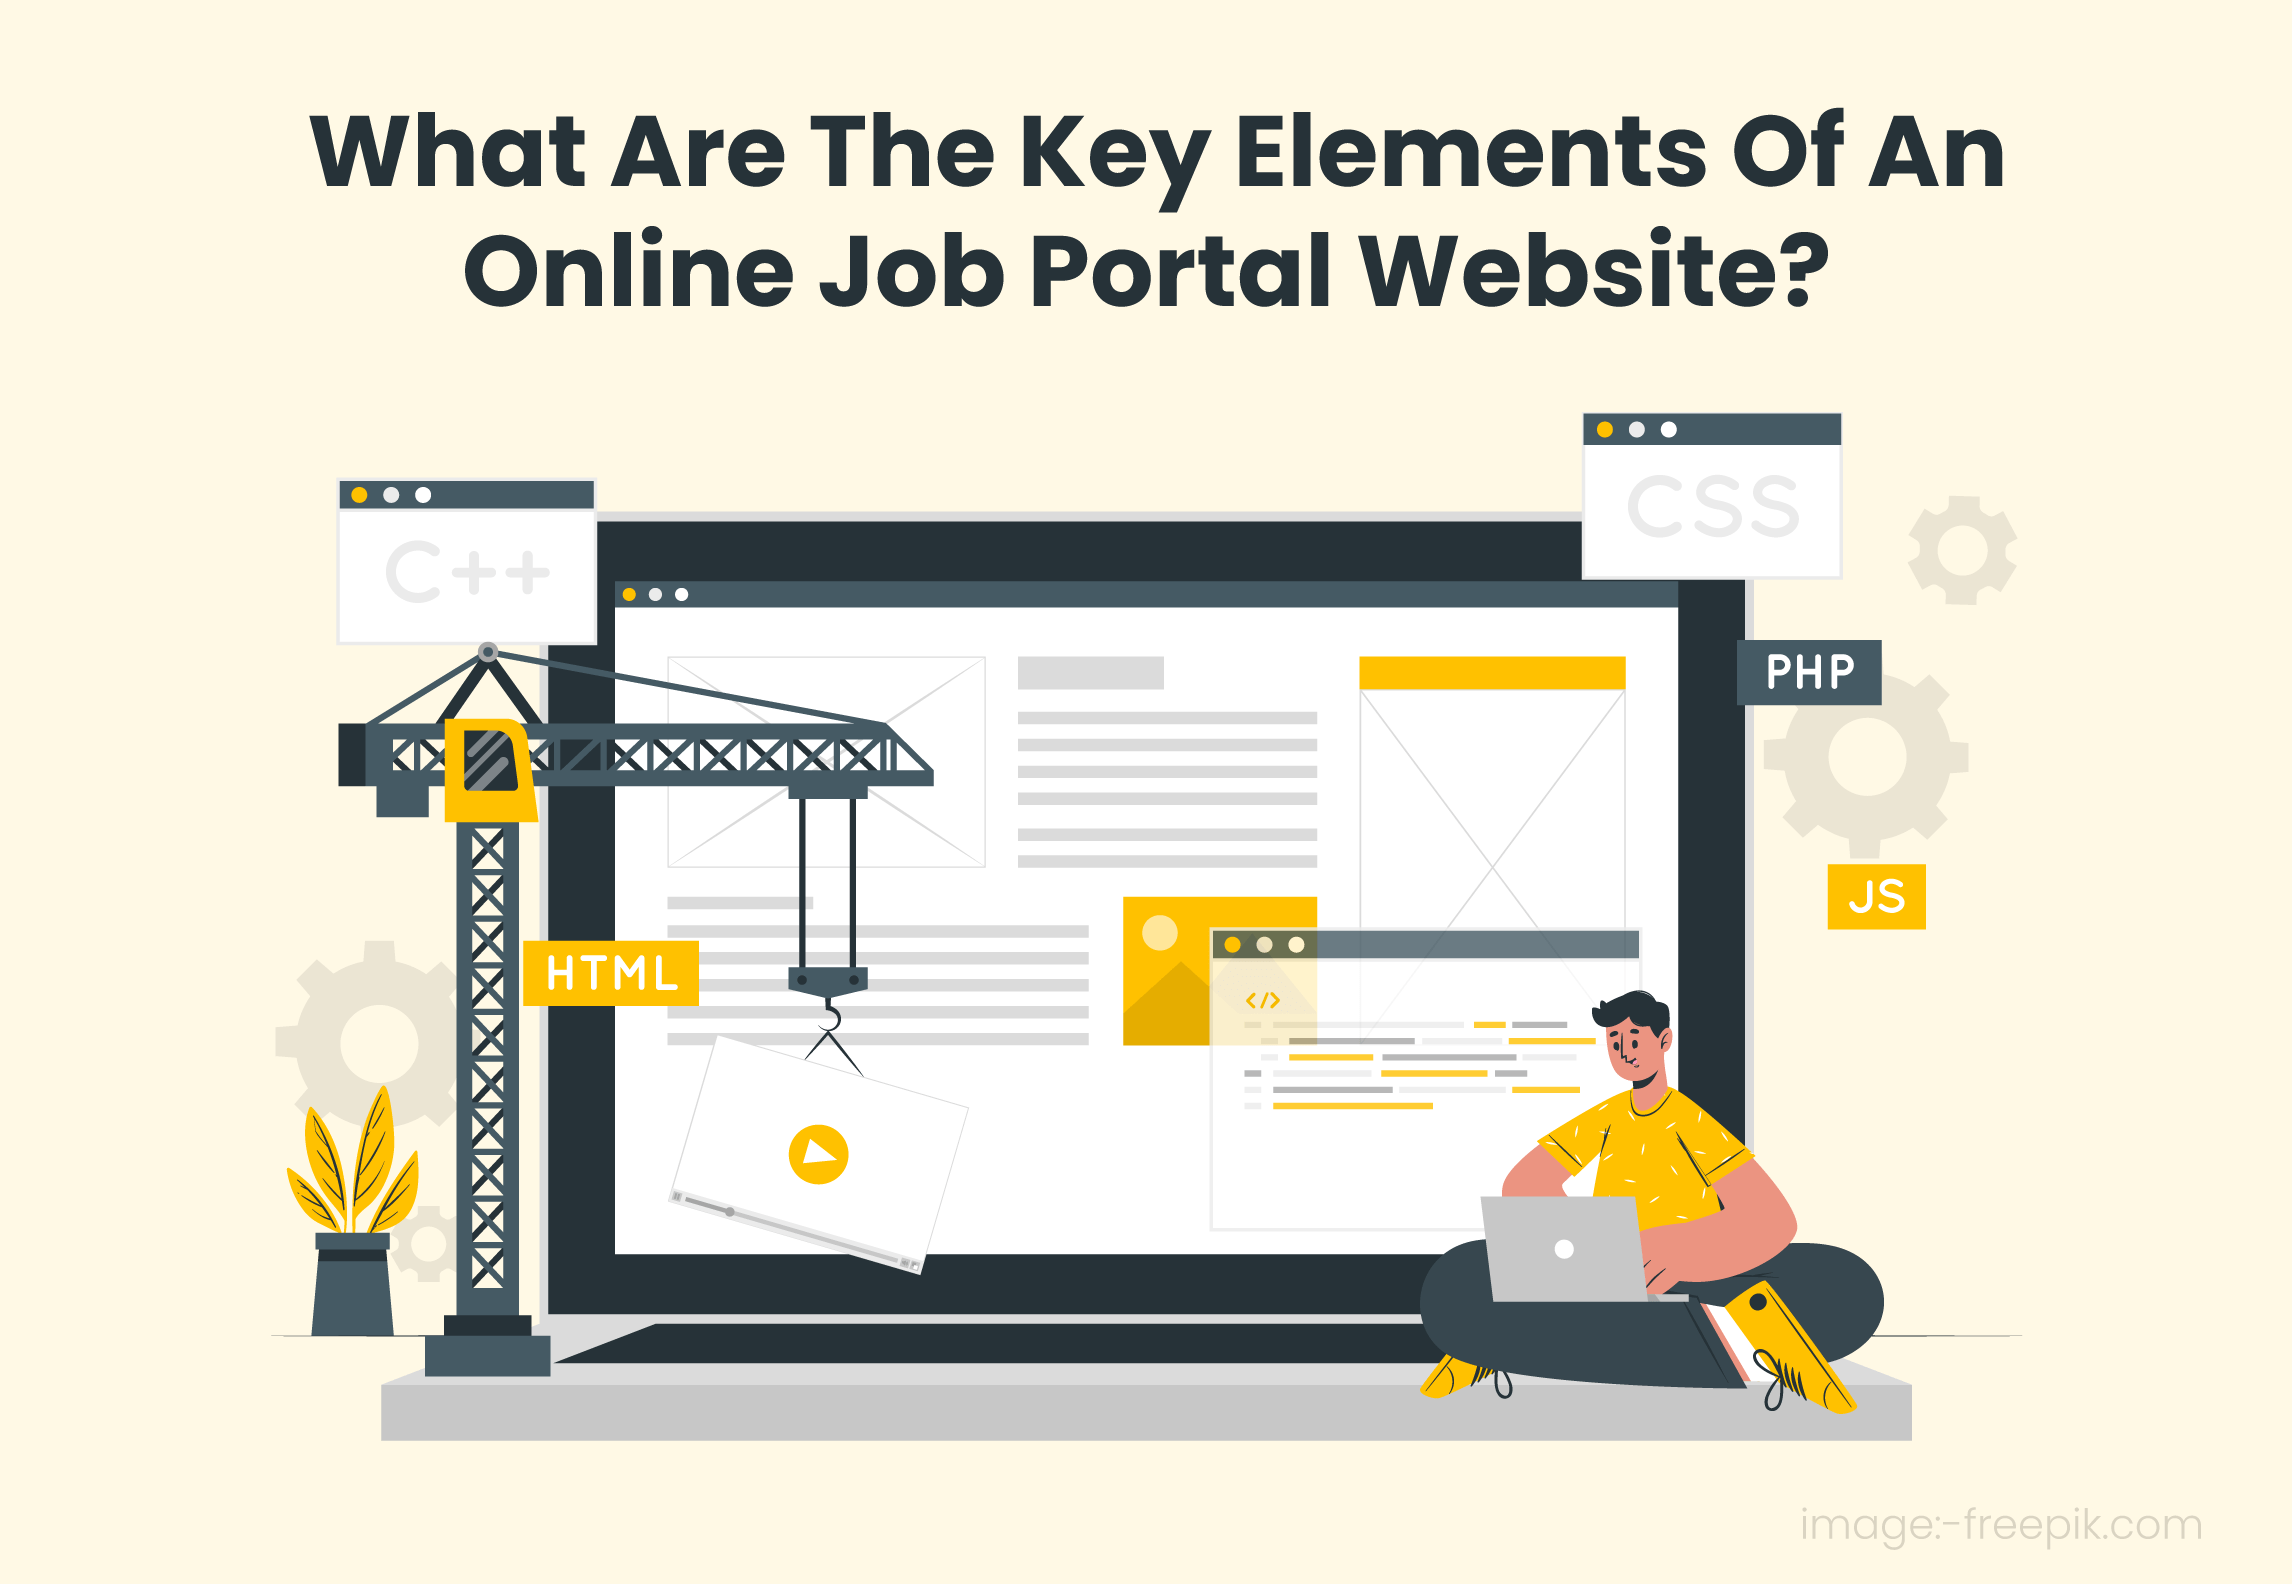 What Are The Key Elements Of An Online Job Portal Website?